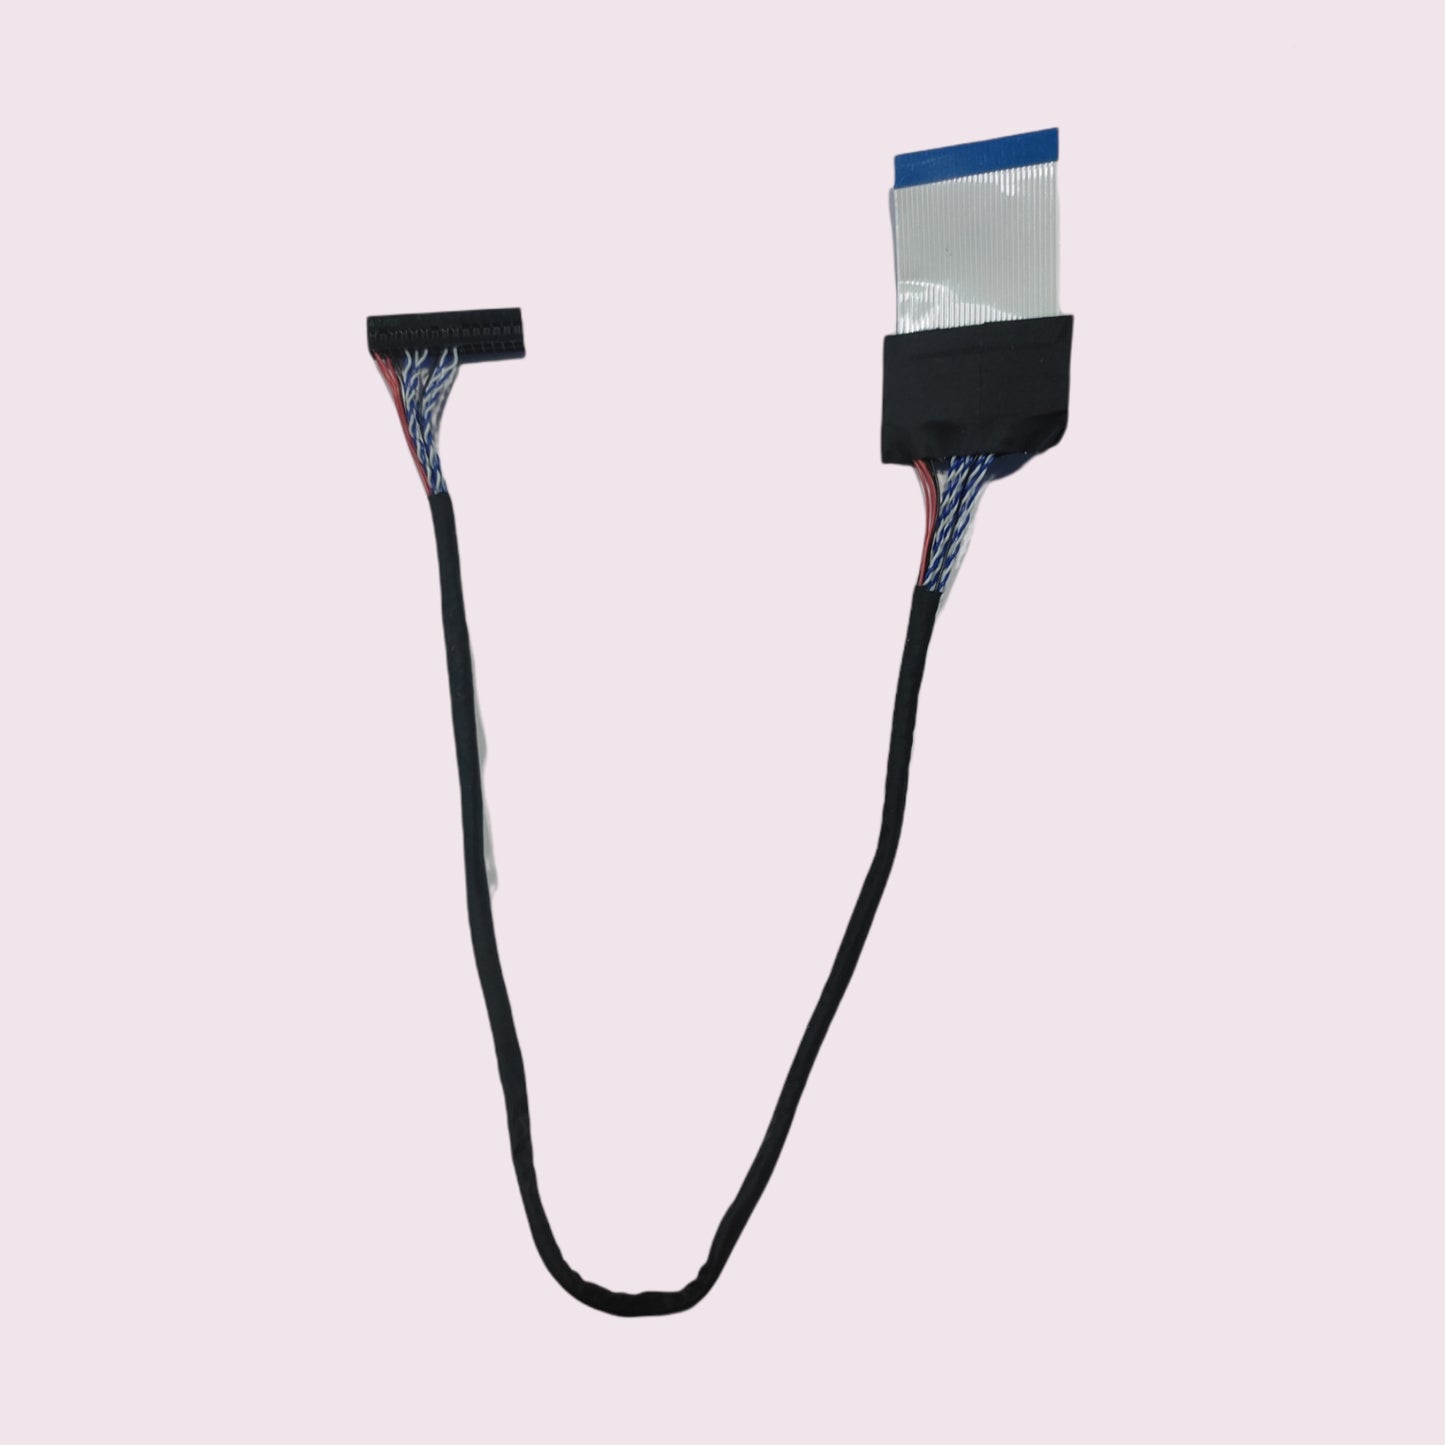 LVDS Cable 08